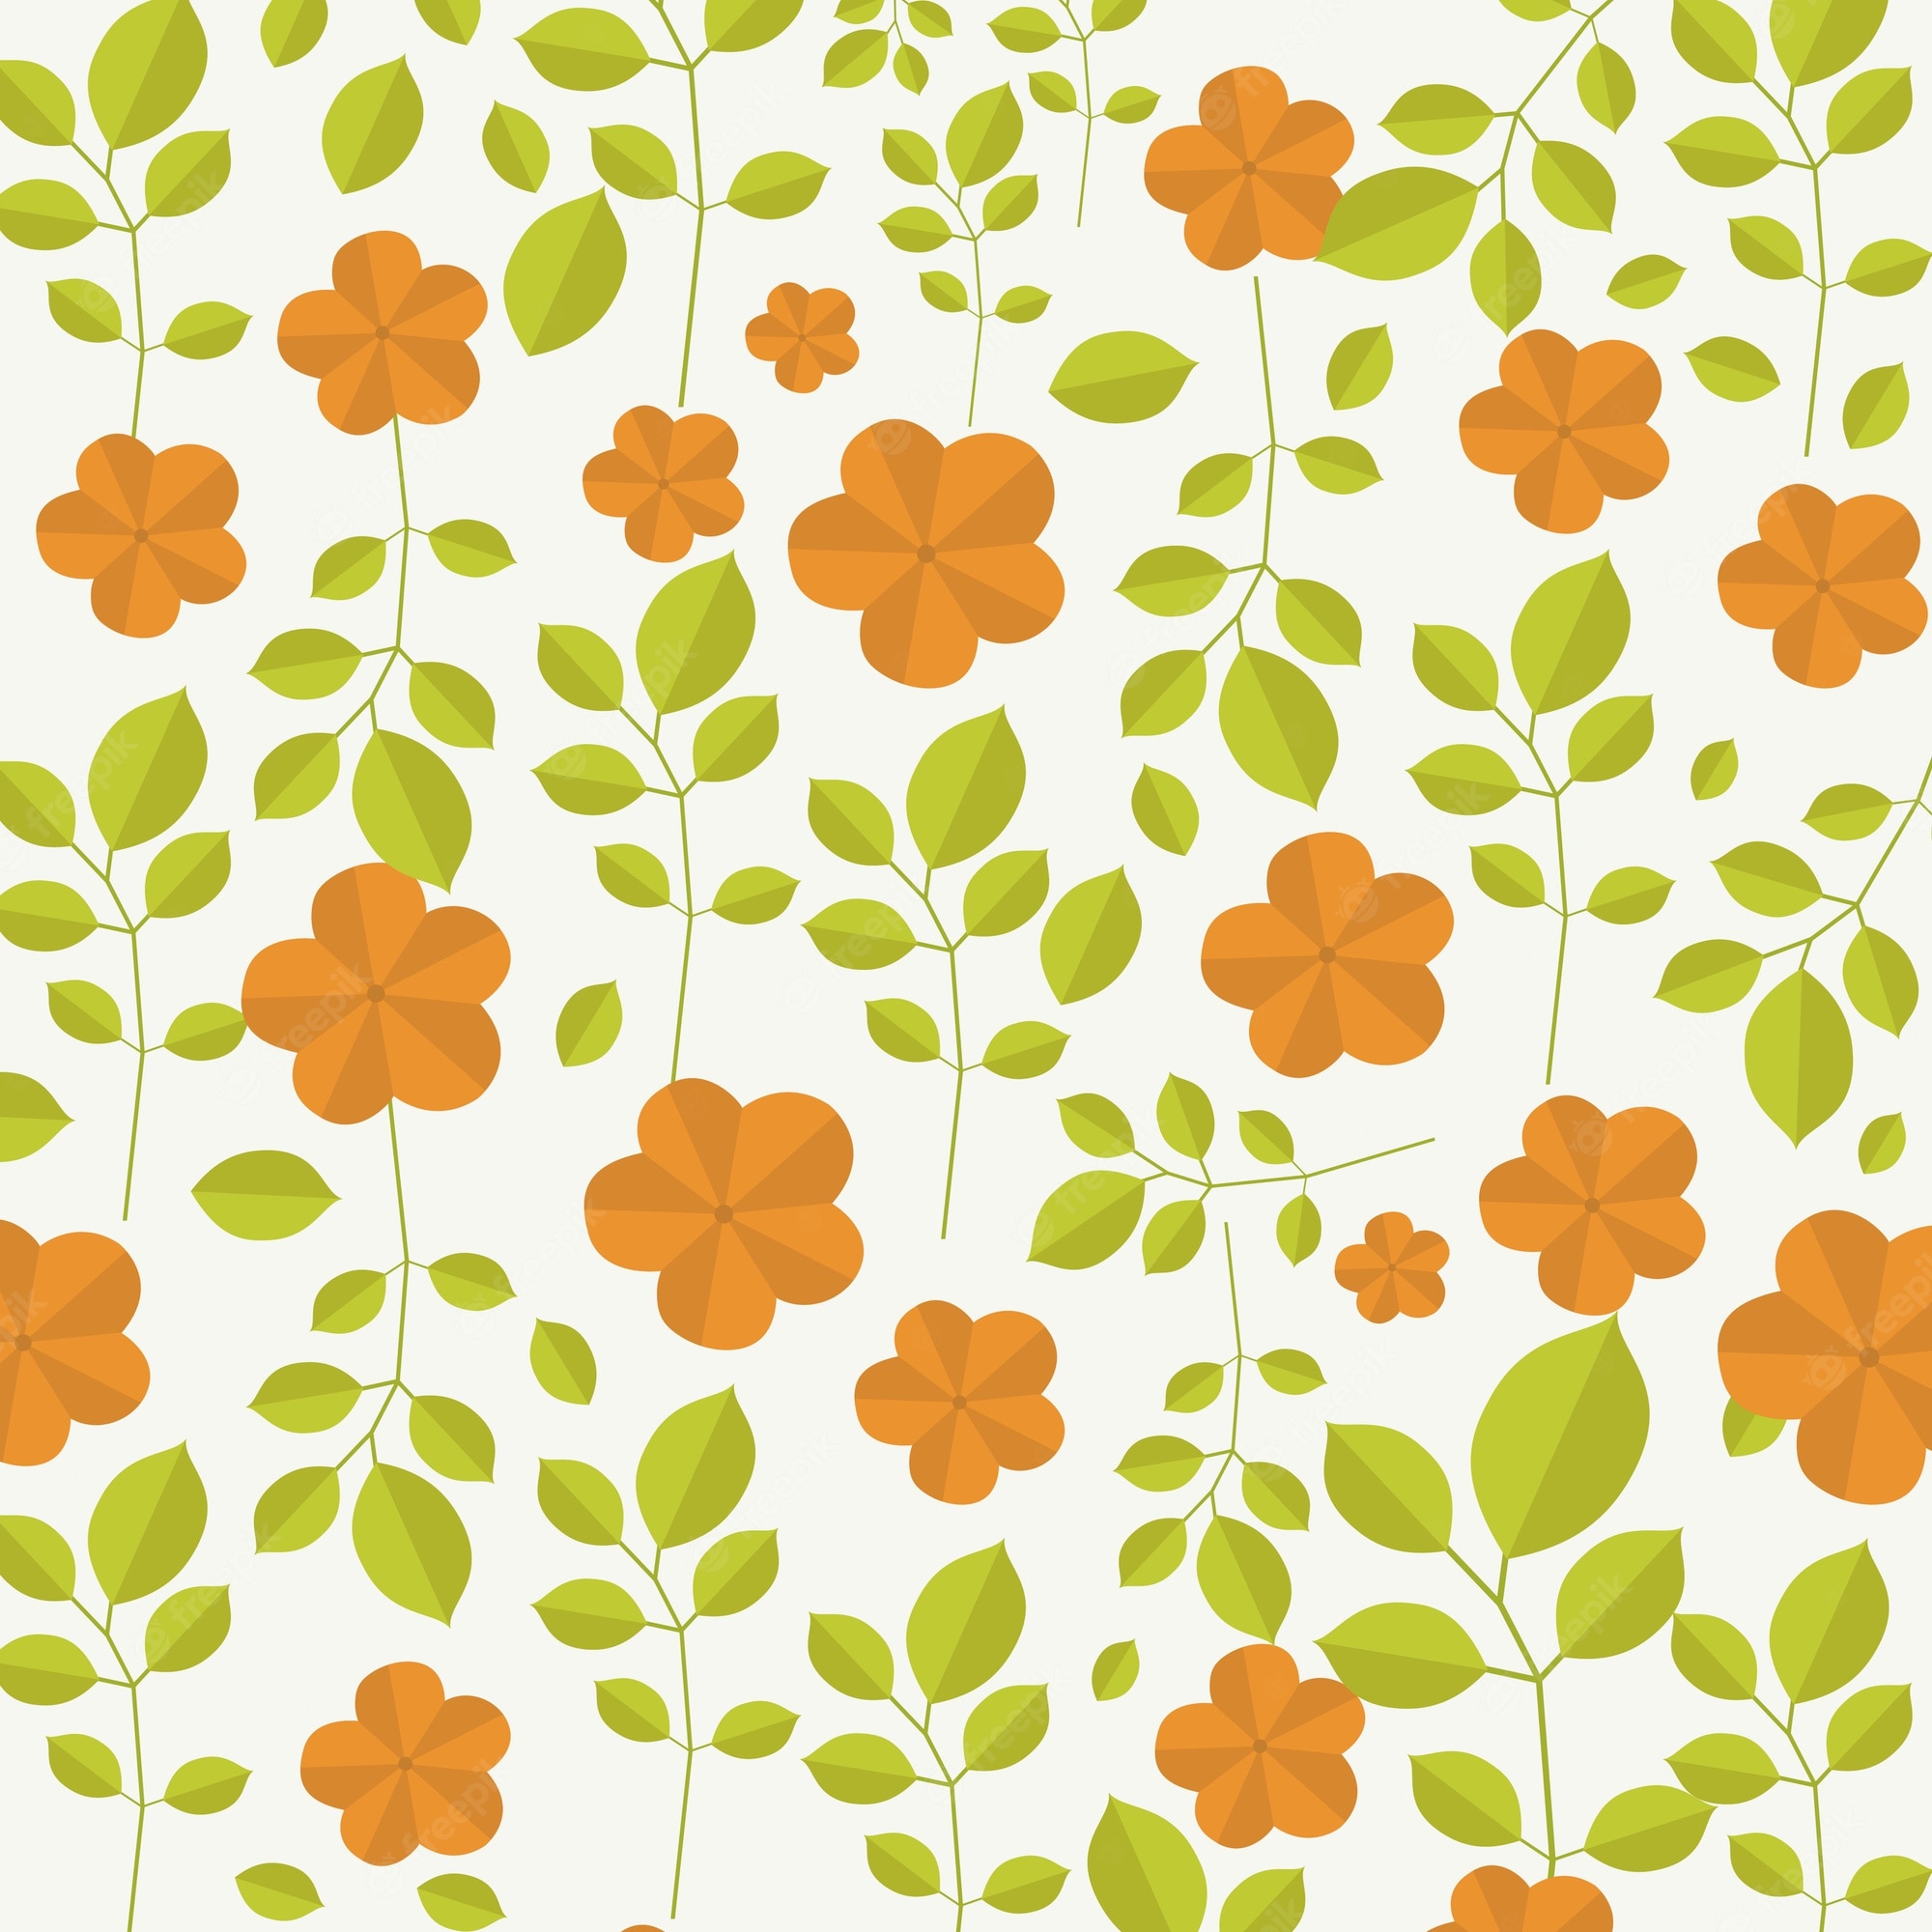 Cool Spring Backgrounds